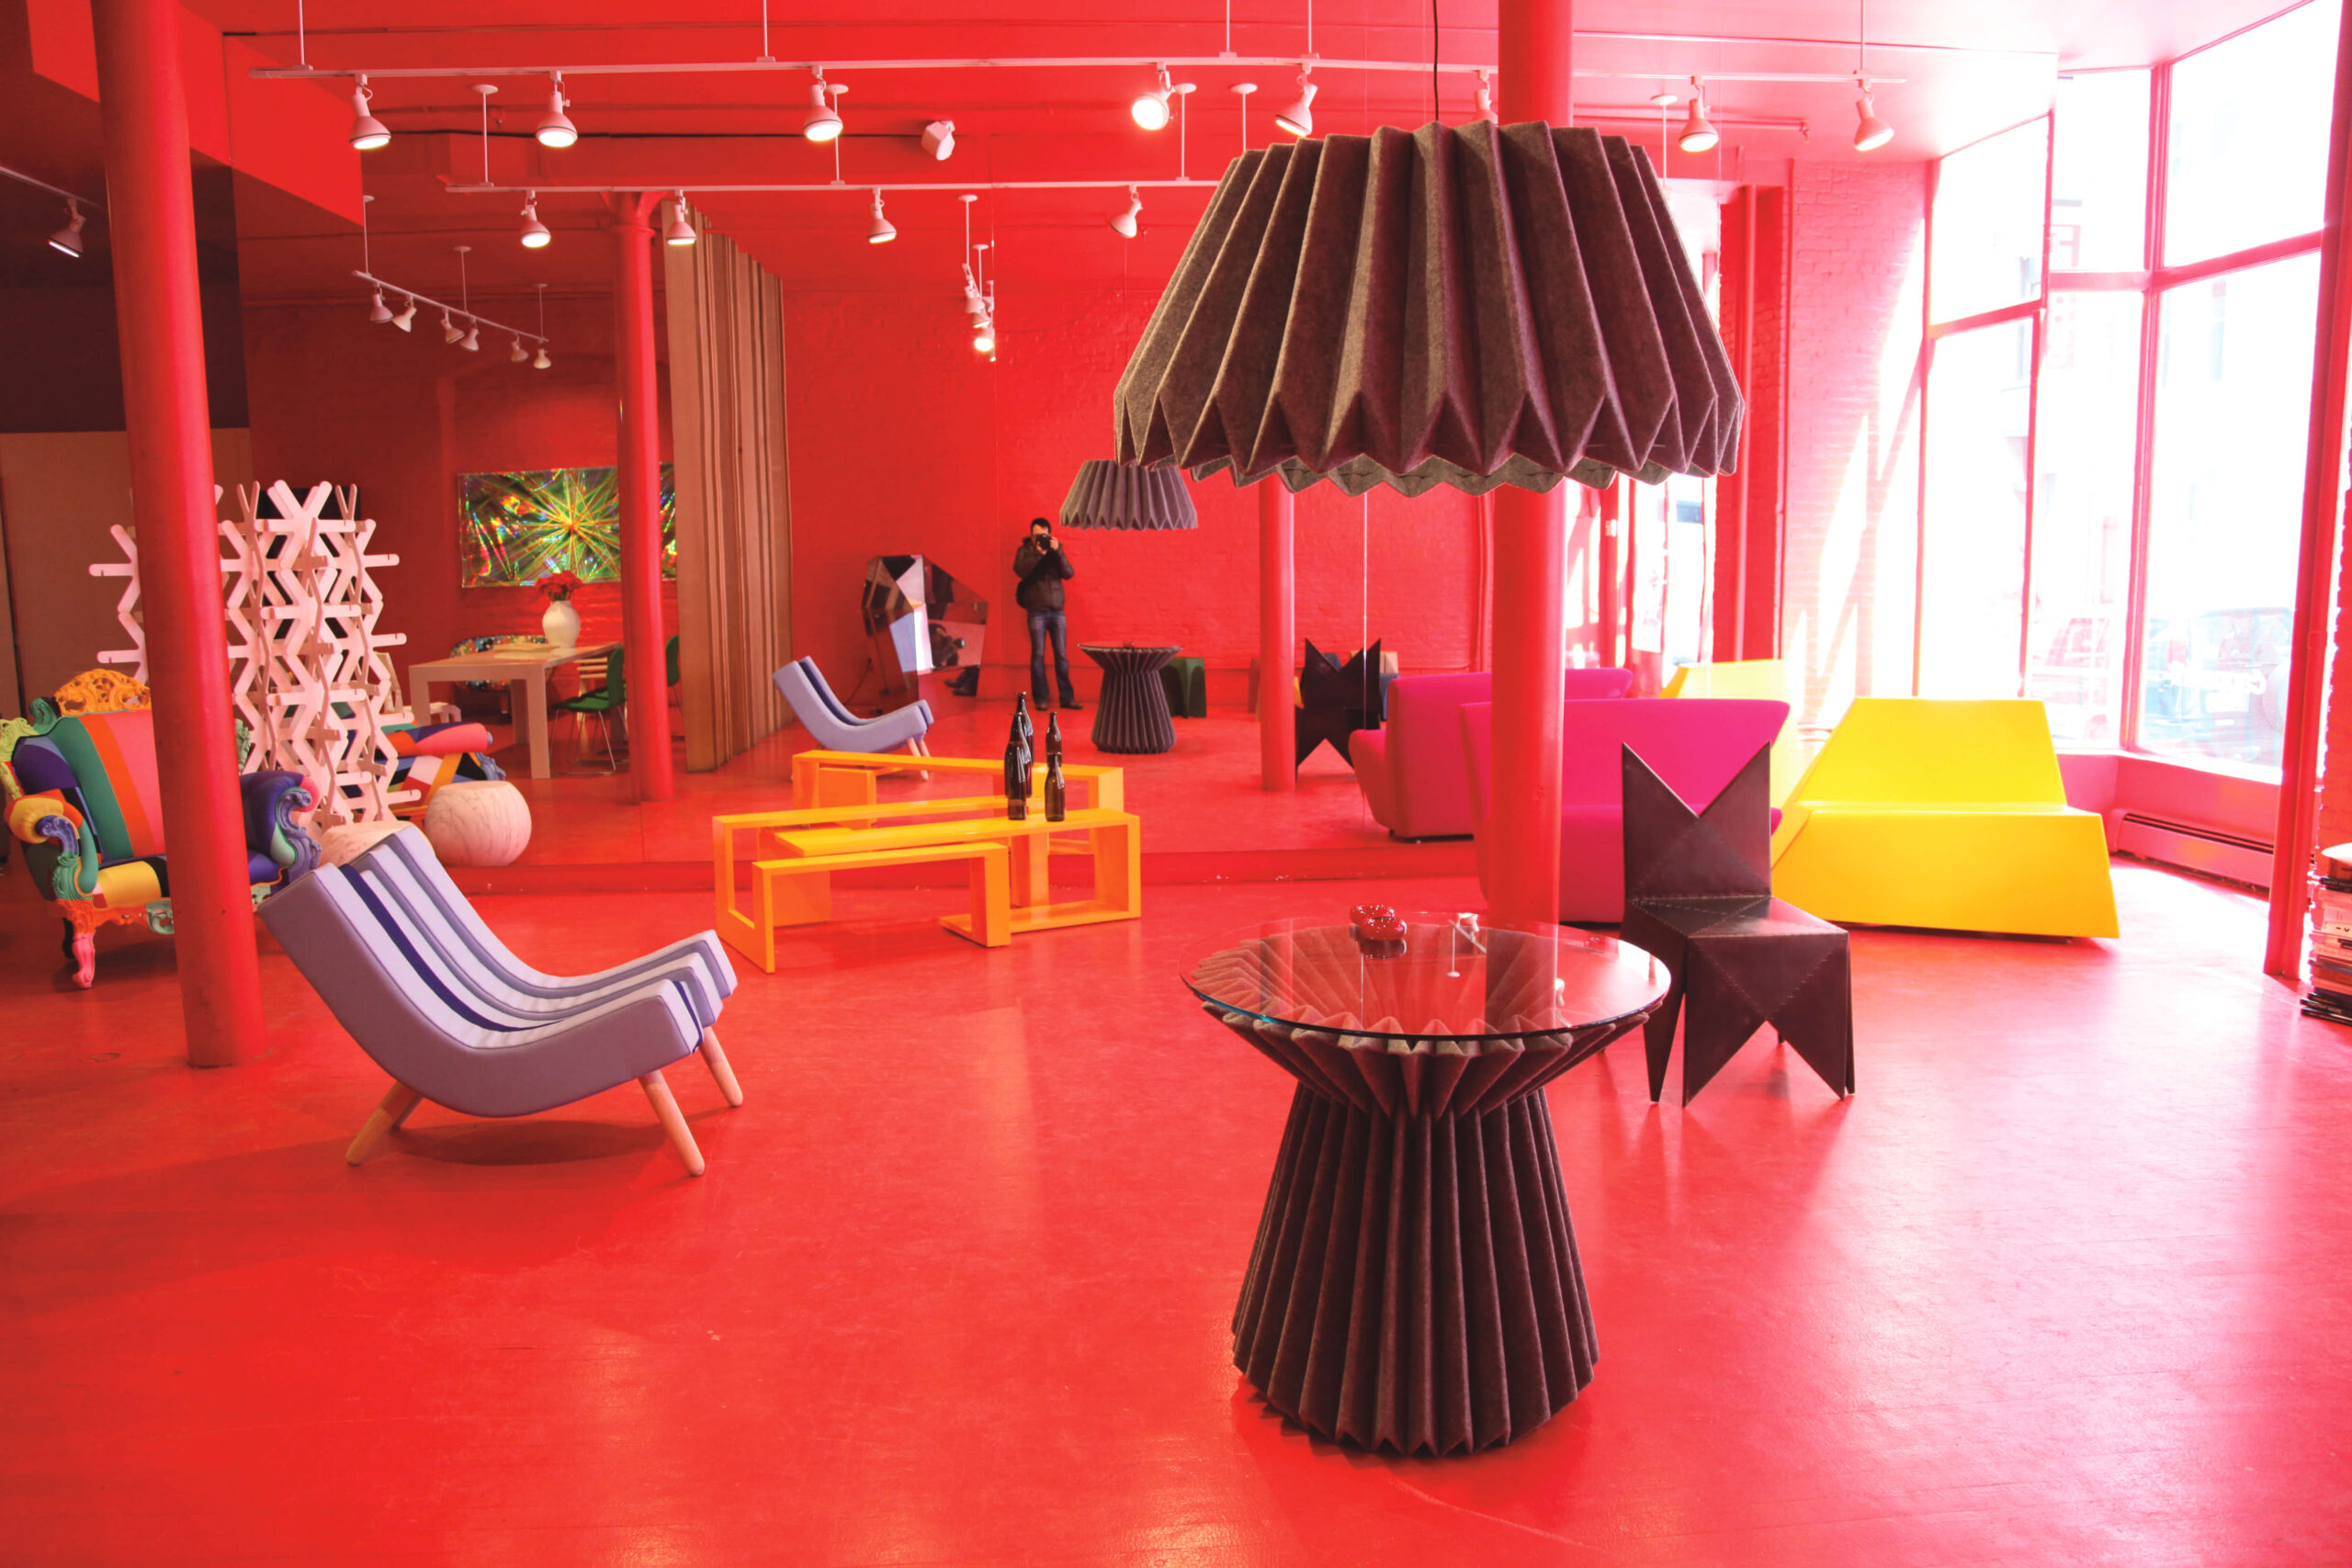 A red colored room with an assortment of different furniture pieces and decorations. The decorations are made of many colors, including yellow, maroon, purple, green, black, pink and more. There is a large mirror at the back of the room where the reflection of the person taking the picture can be seen.